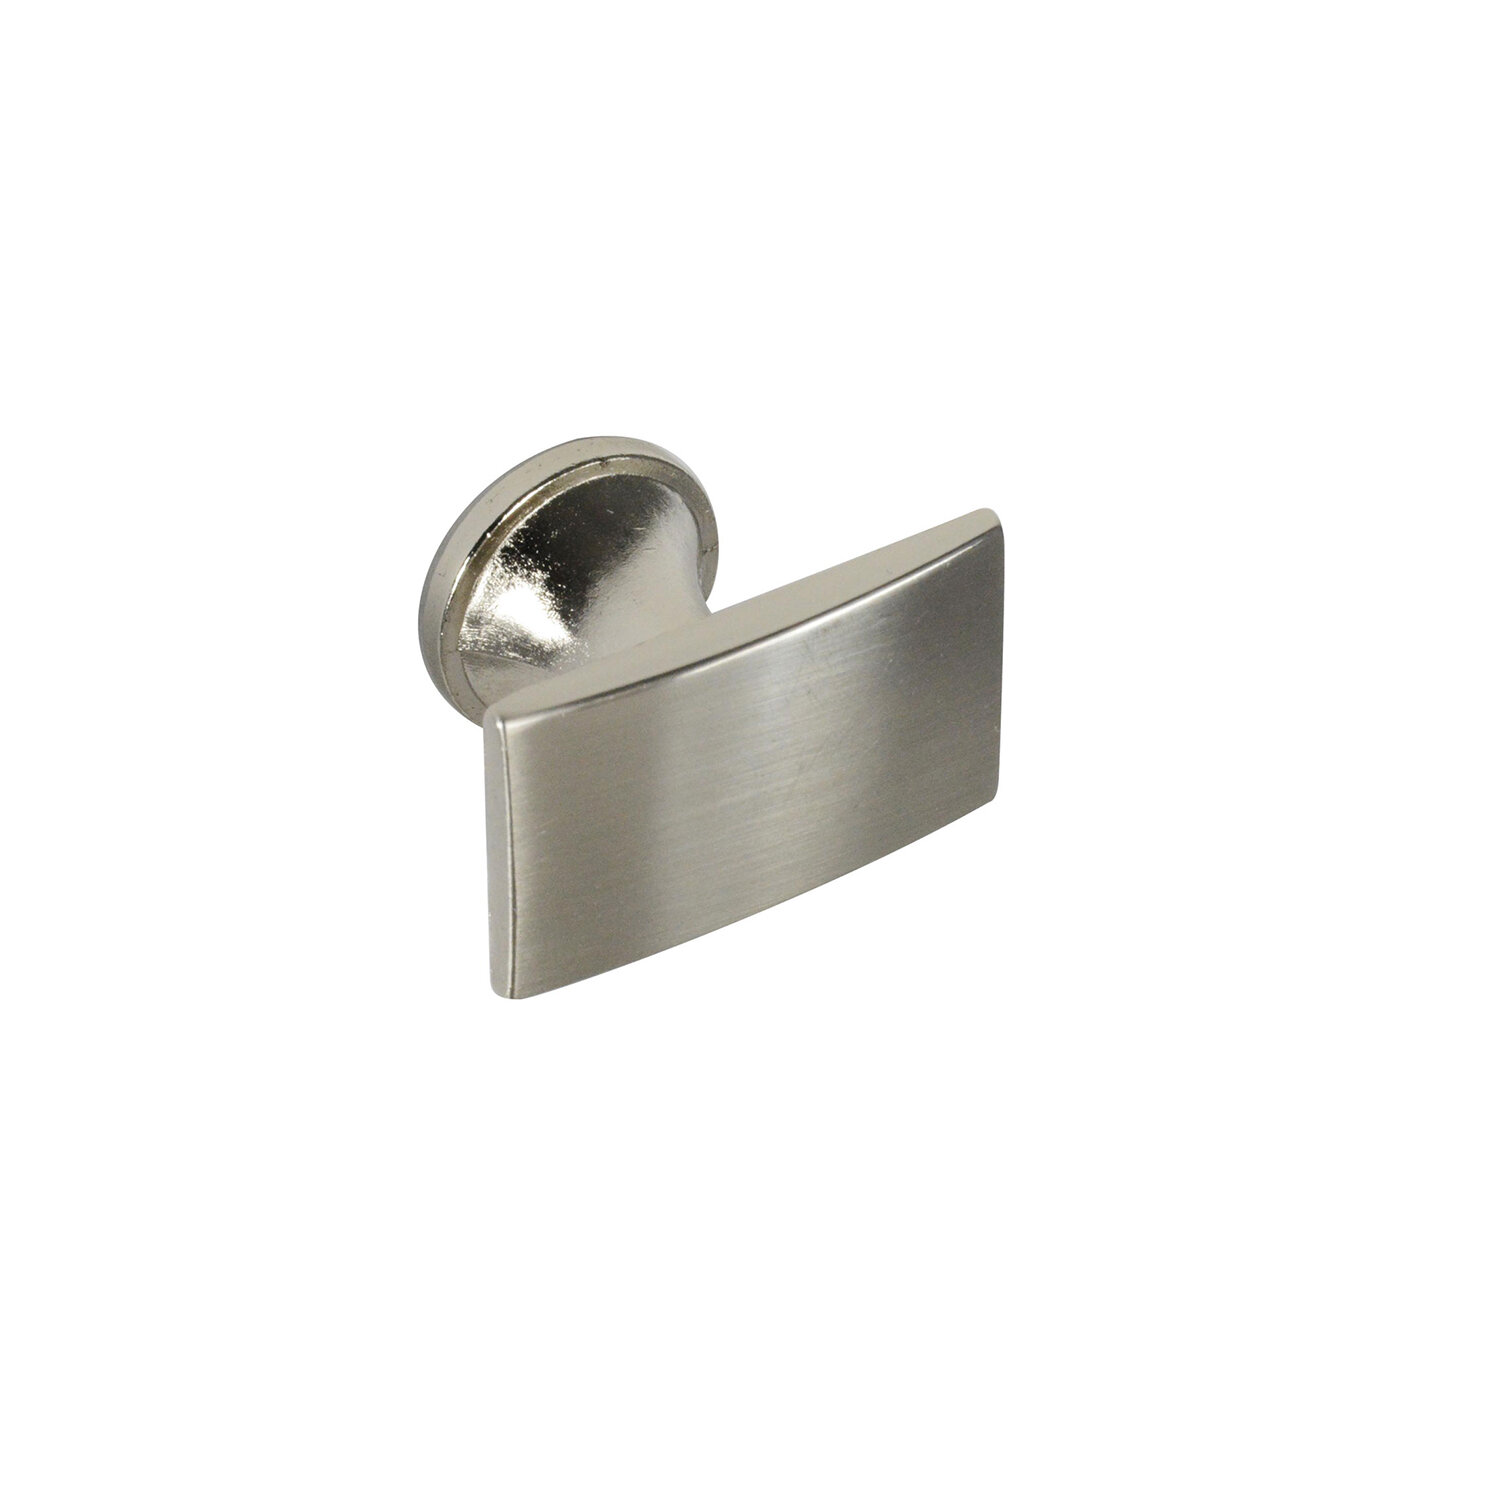 Claremont Knob Brushed Brass - 1 3/8 in - Handles & More